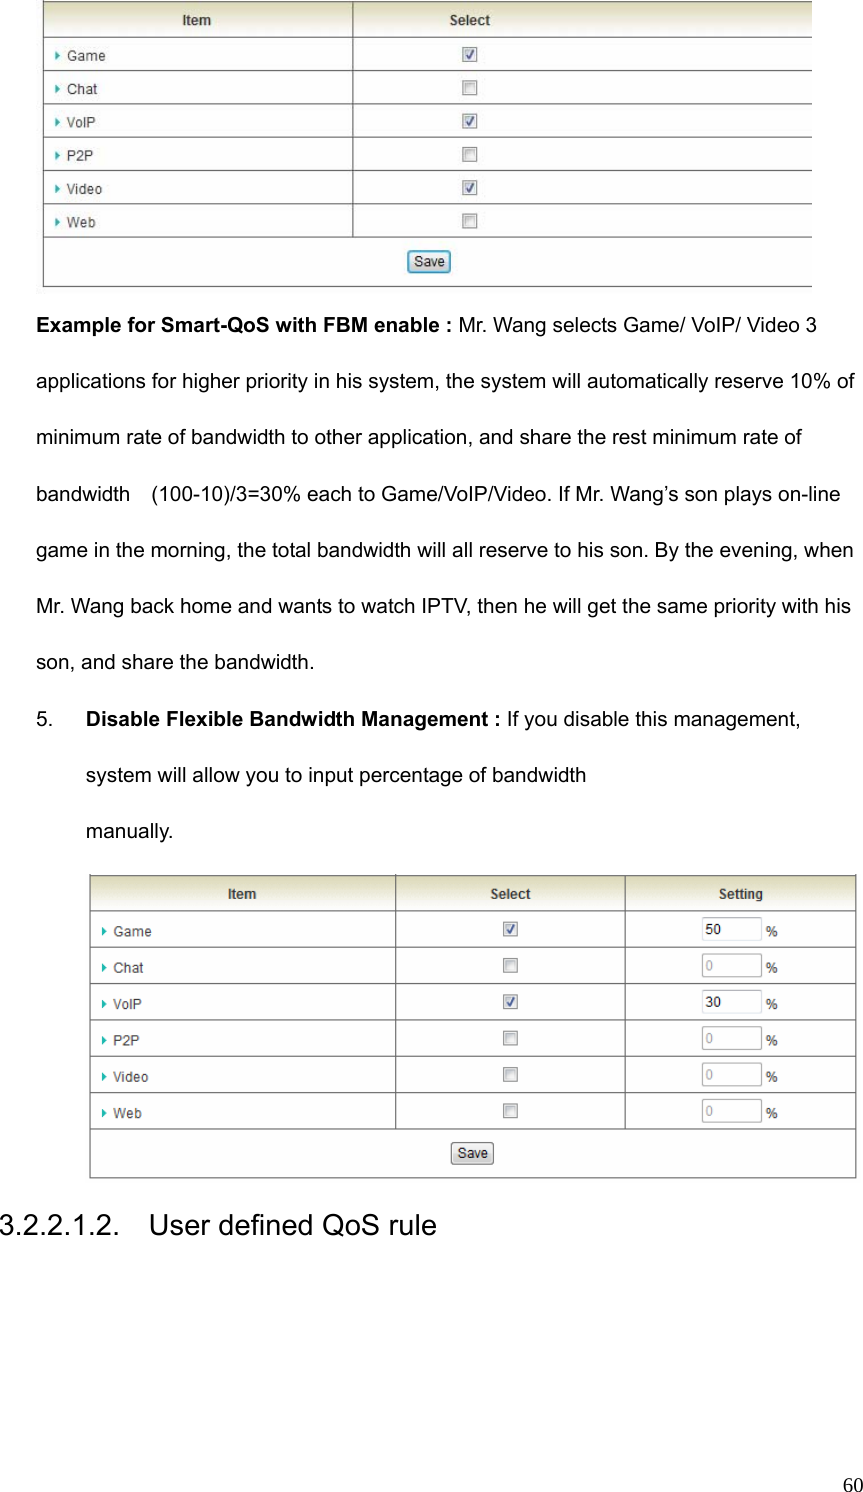  60 Example for Smart-QoS with FBM enable : Mr. Wang selects Game/ VoIP/ Video 3 applications for higher priority in his system, the system will automatically reserve 10% of minimum rate of bandwidth to other application, and share the rest minimum rate of bandwidth    (100-10)/3=30% each to Game/VoIP/Video. If Mr. Wang’s son plays on-line game in the morning, the total bandwidth will all reserve to his son. By the evening, when Mr. Wang back home and wants to watch IPTV, then he will get the same priority with his son, and share the bandwidth.     5.  Disable Flexible Bandwidth Management : If you disable this management, system will allow you to input percentage of bandwidth manually. 3.2.2.1.2.  User defined QoS rule 